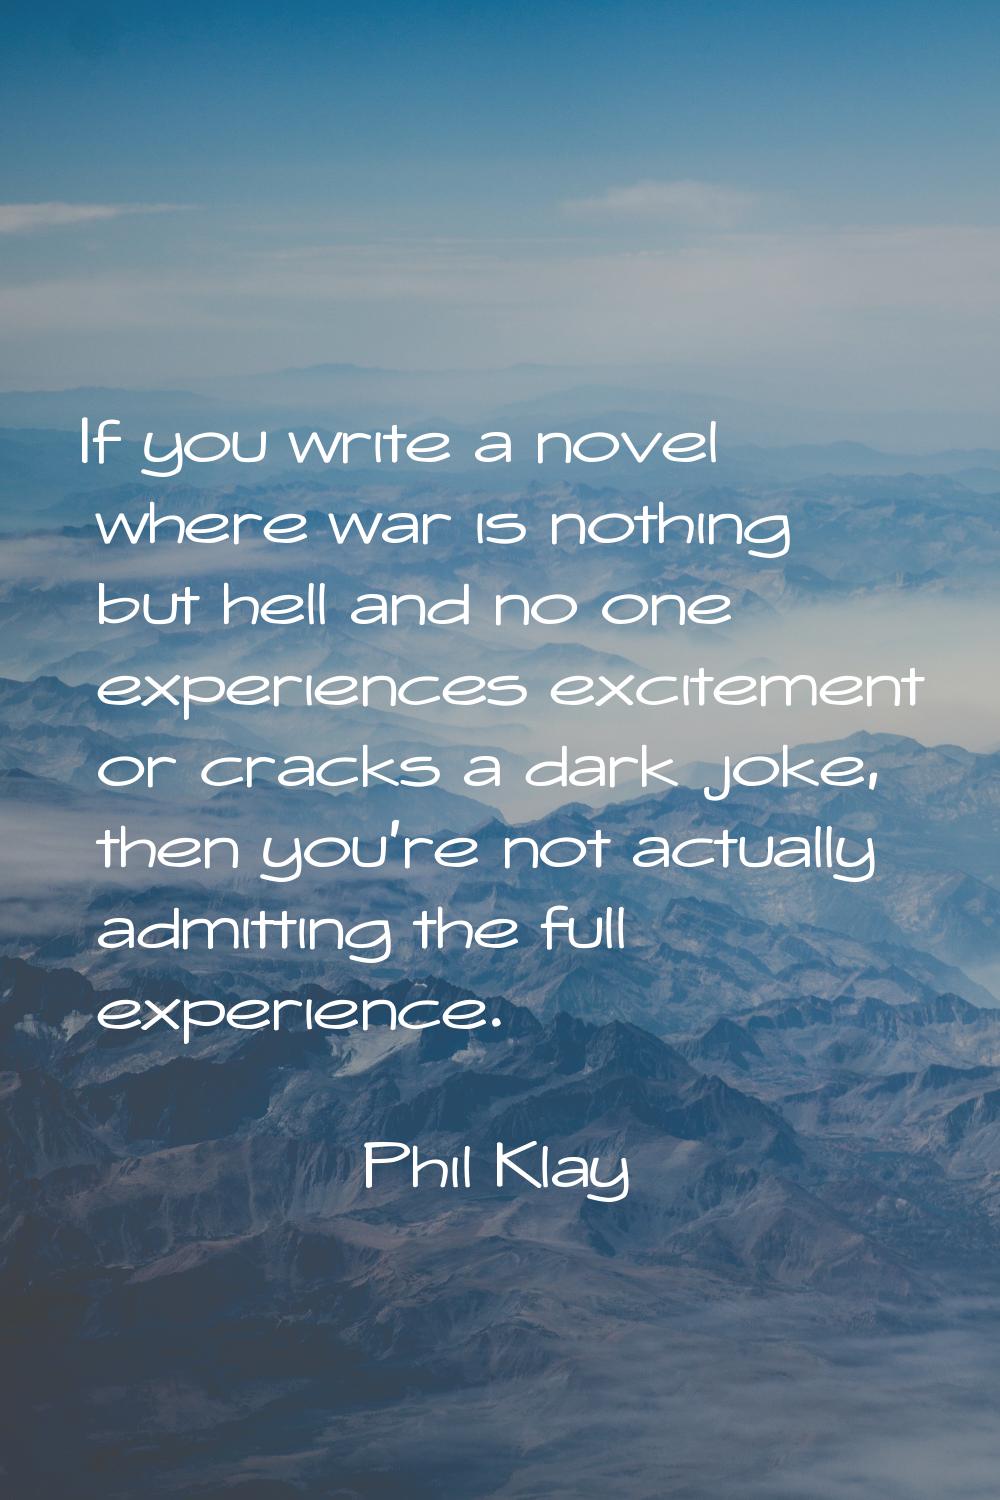 If you write a novel where war is nothing but hell and no one experiences excitement or cracks a da